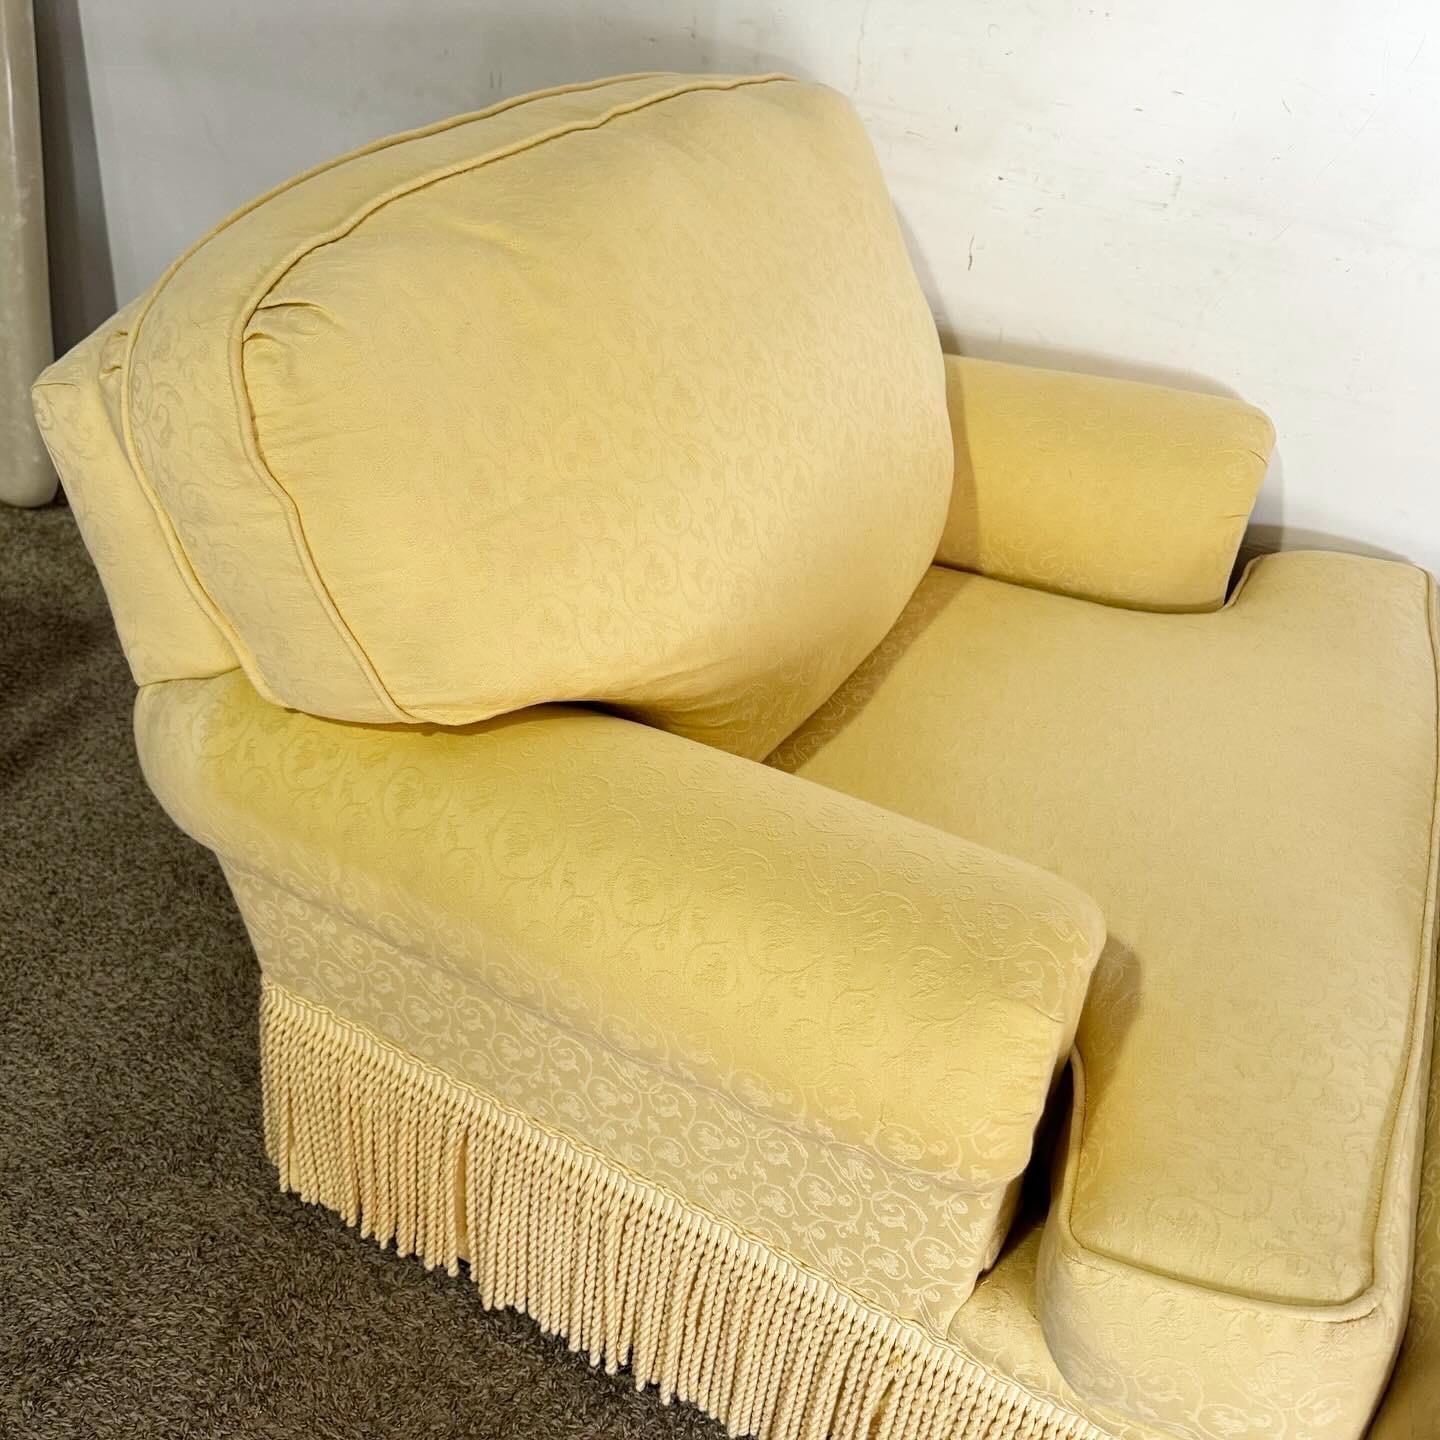 Regency Yellow Fabric Arm Chairs With Pillows and Covers - a Pair For Sale 4